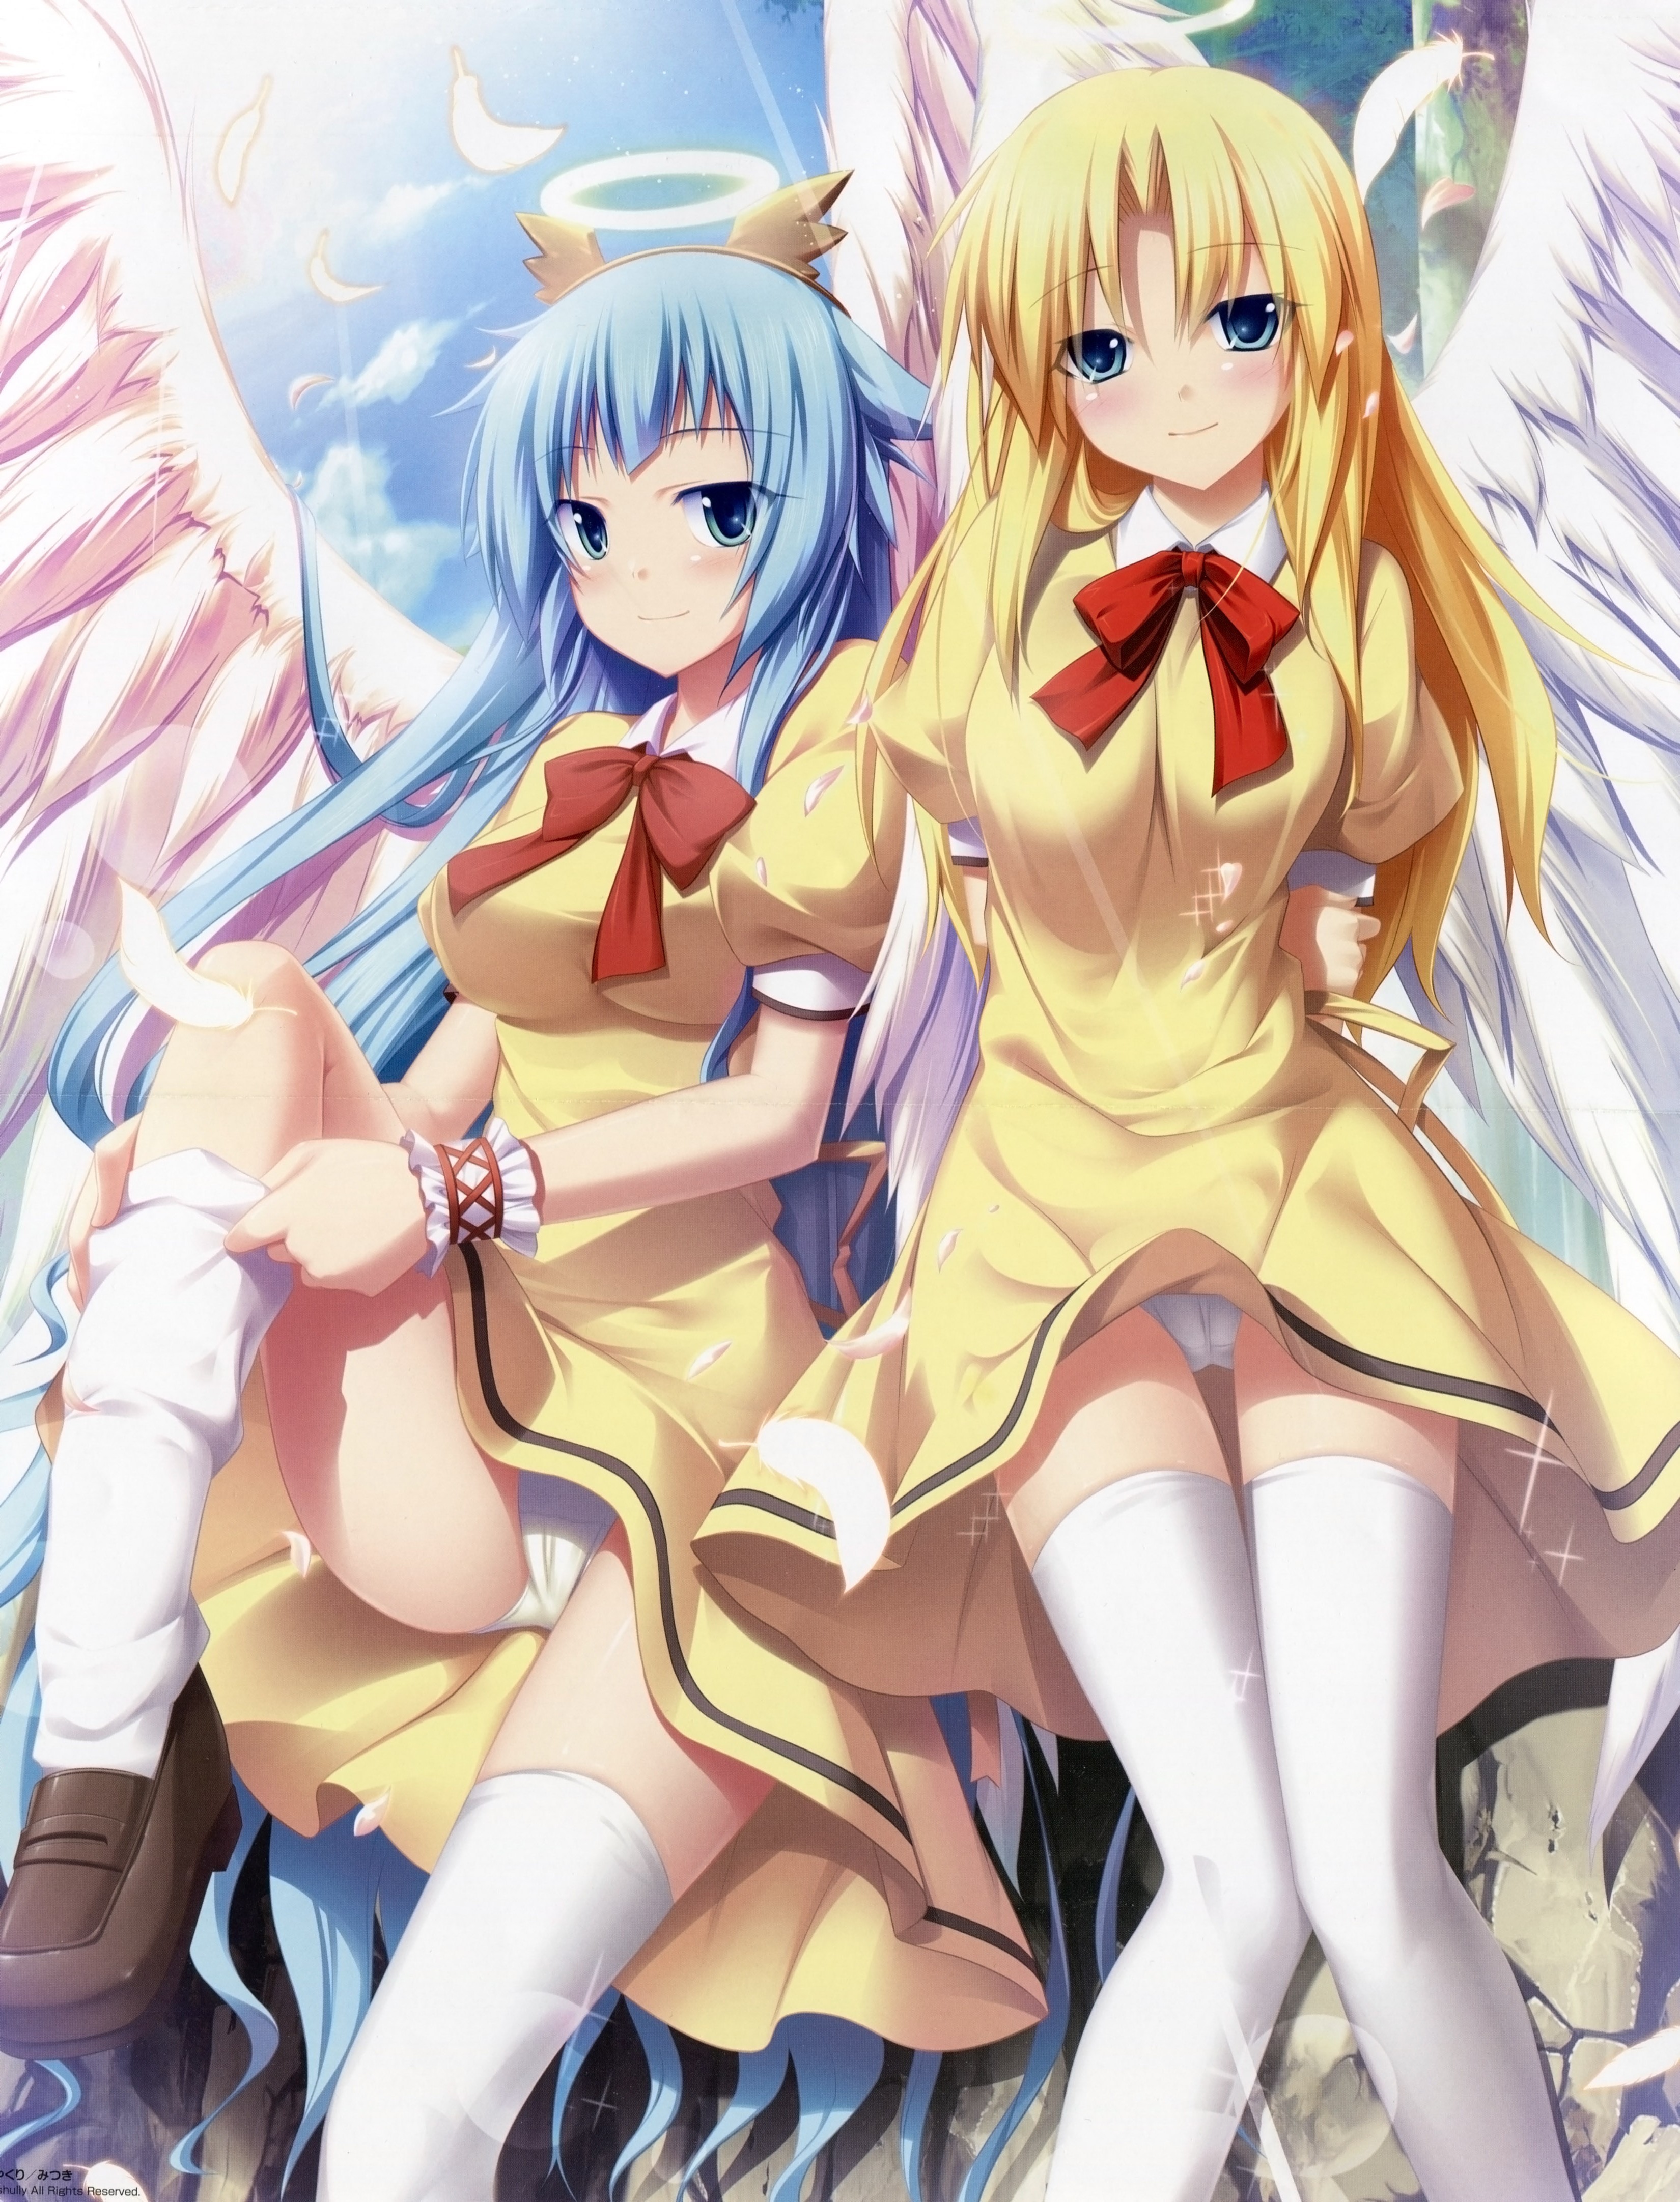 Anime 3300x4326 angel Melodiana Kamidori Alchemy Meister anime girls panties blonde cyan hair boobs stockings looking at viewer knees together